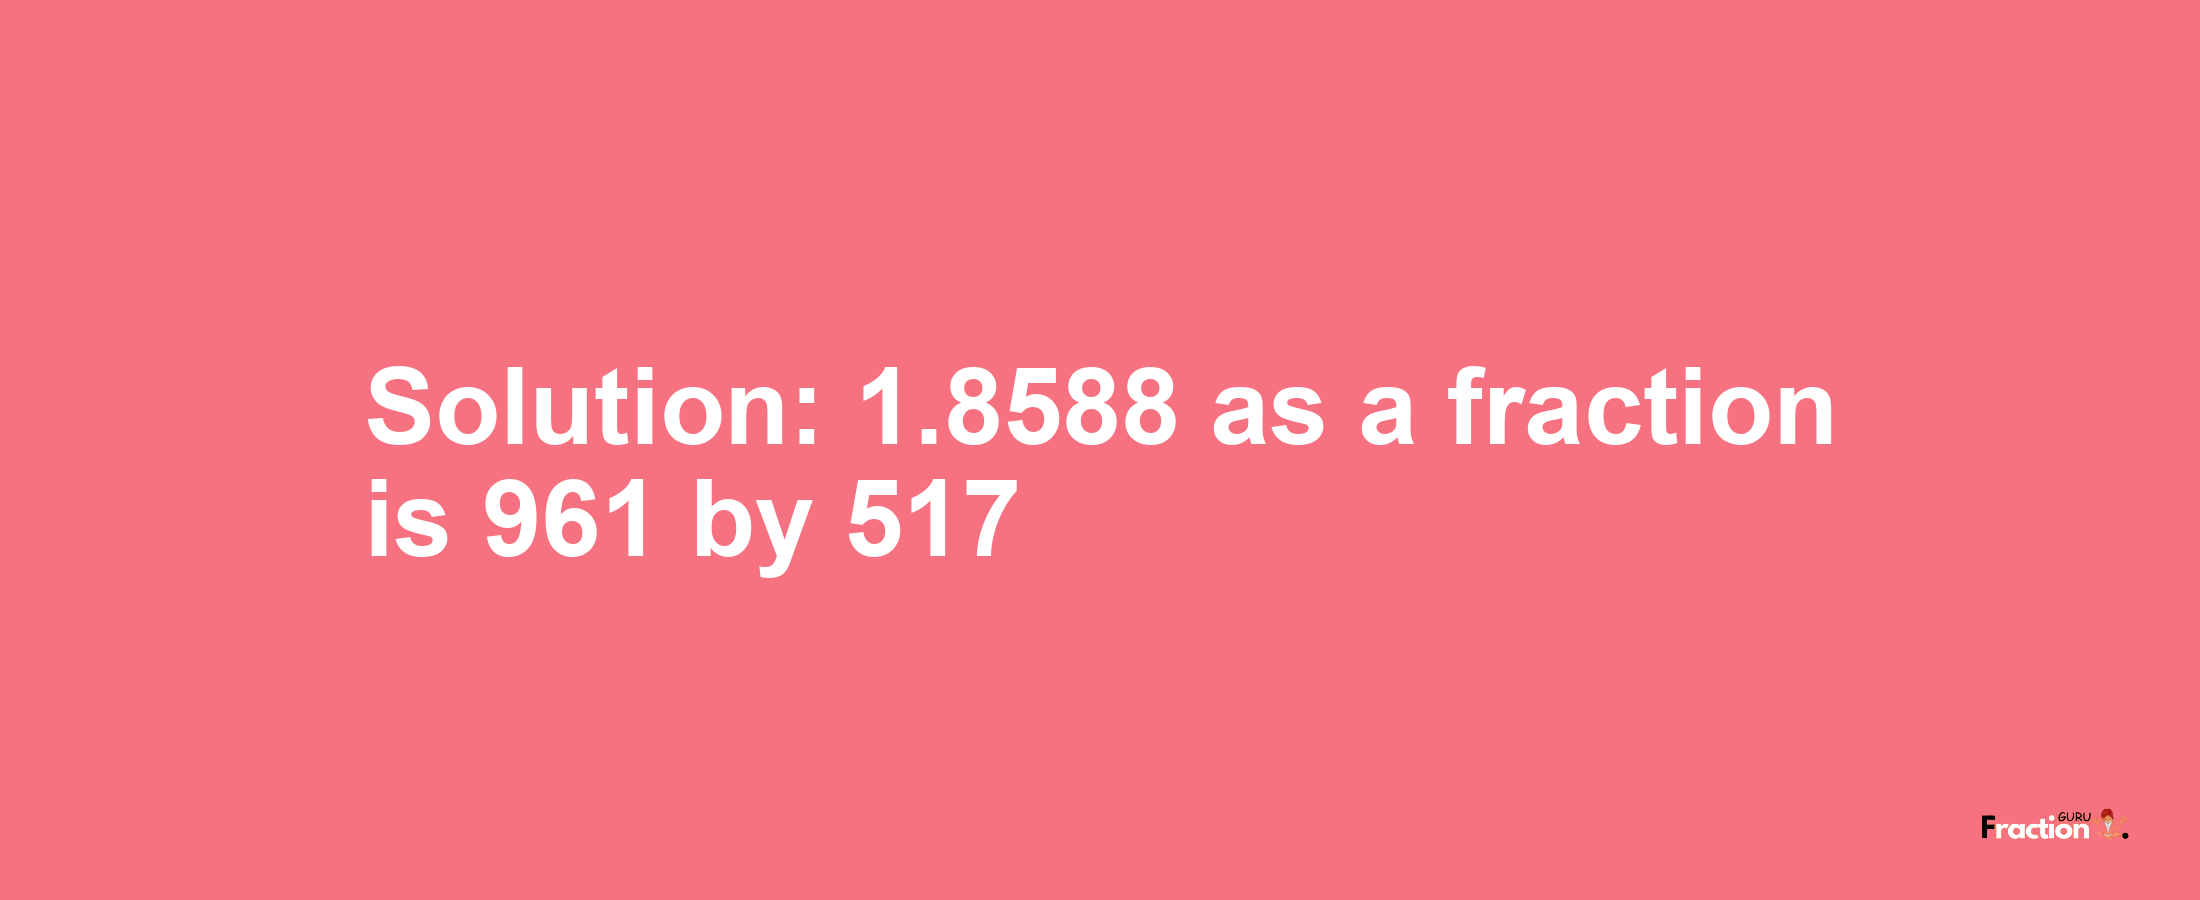 Solution:1.8588 as a fraction is 961/517